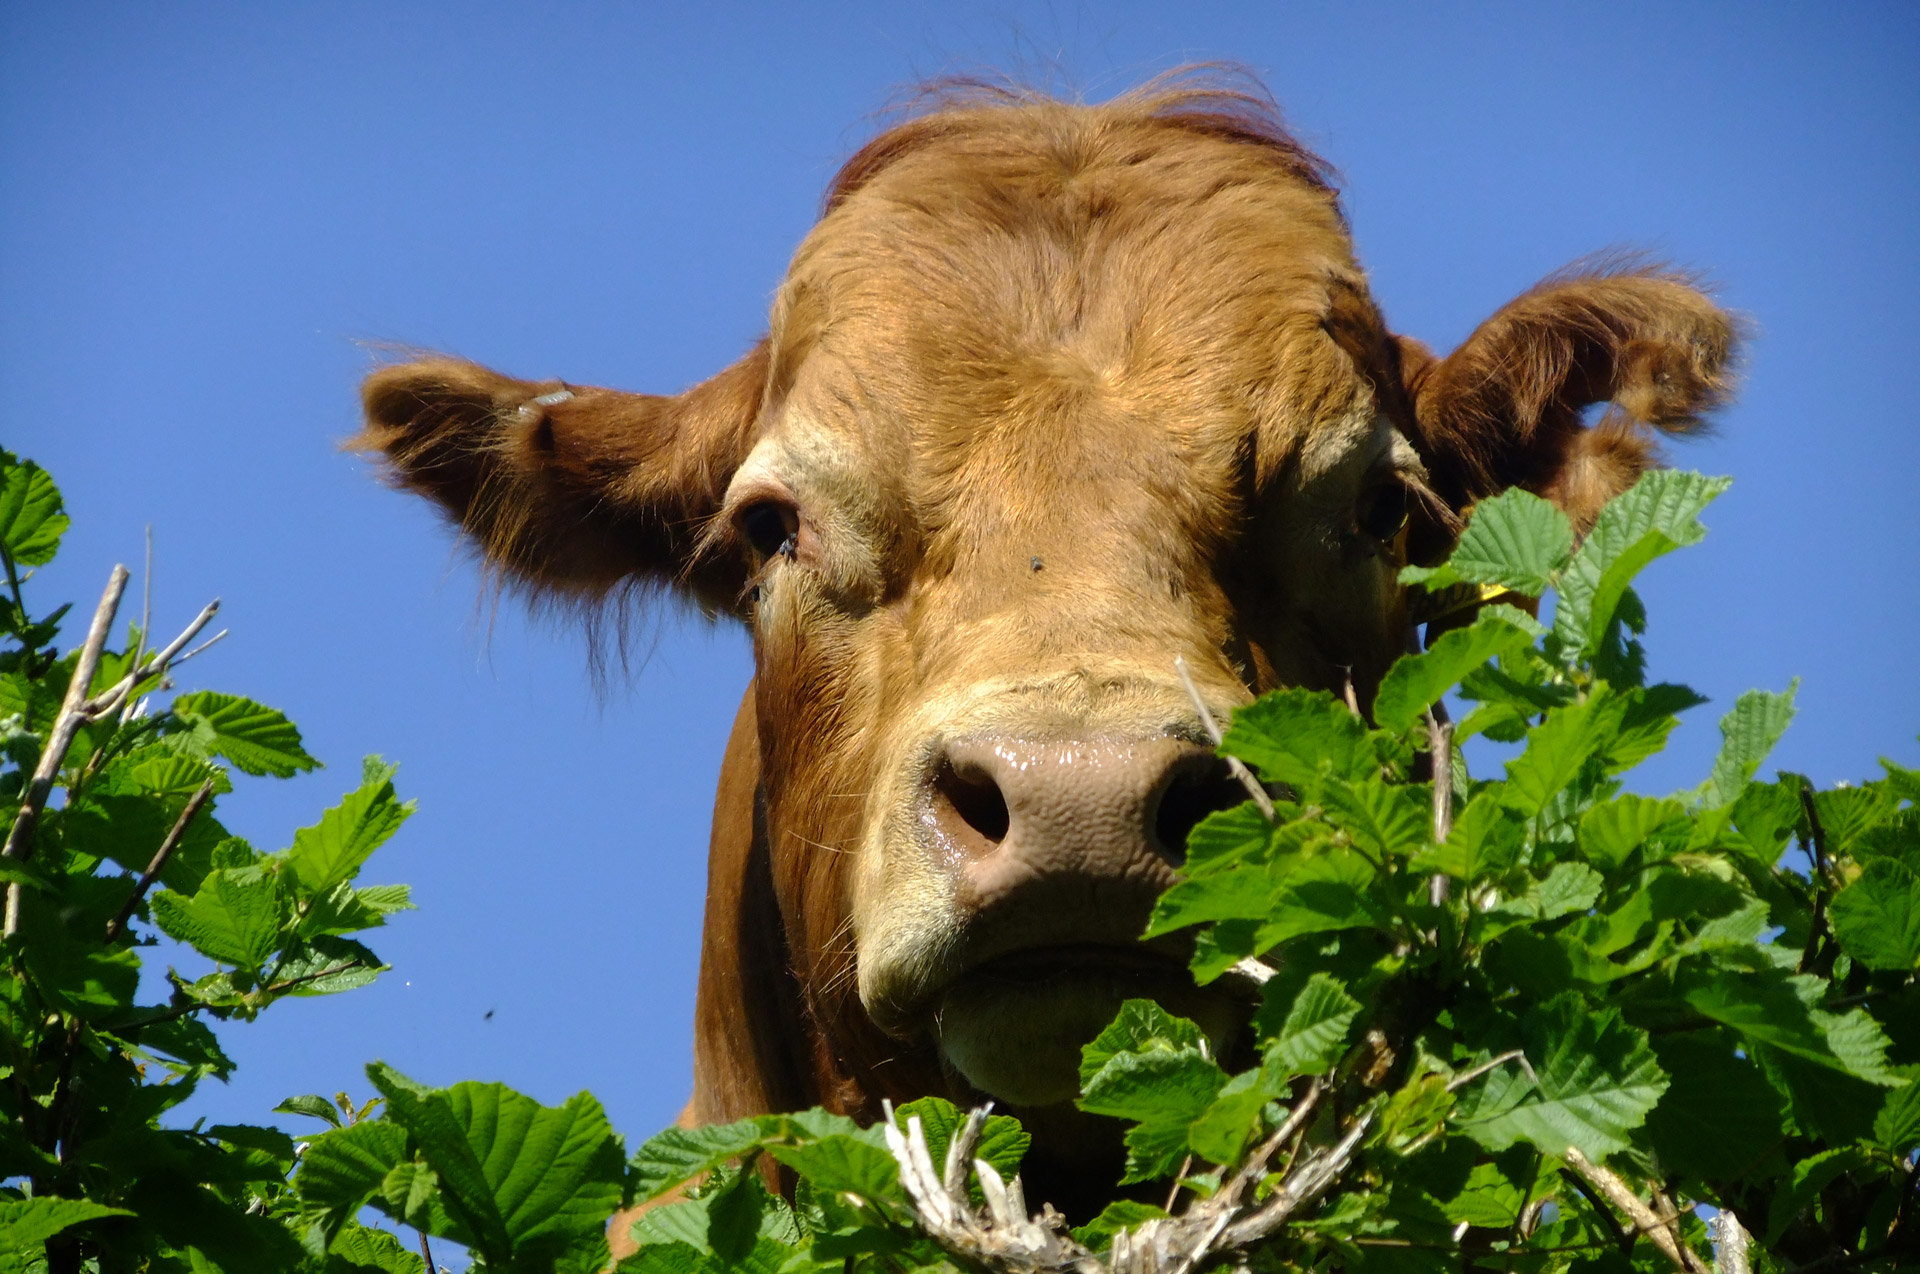 A big brown cow is watching us as we walk along a road in Wales